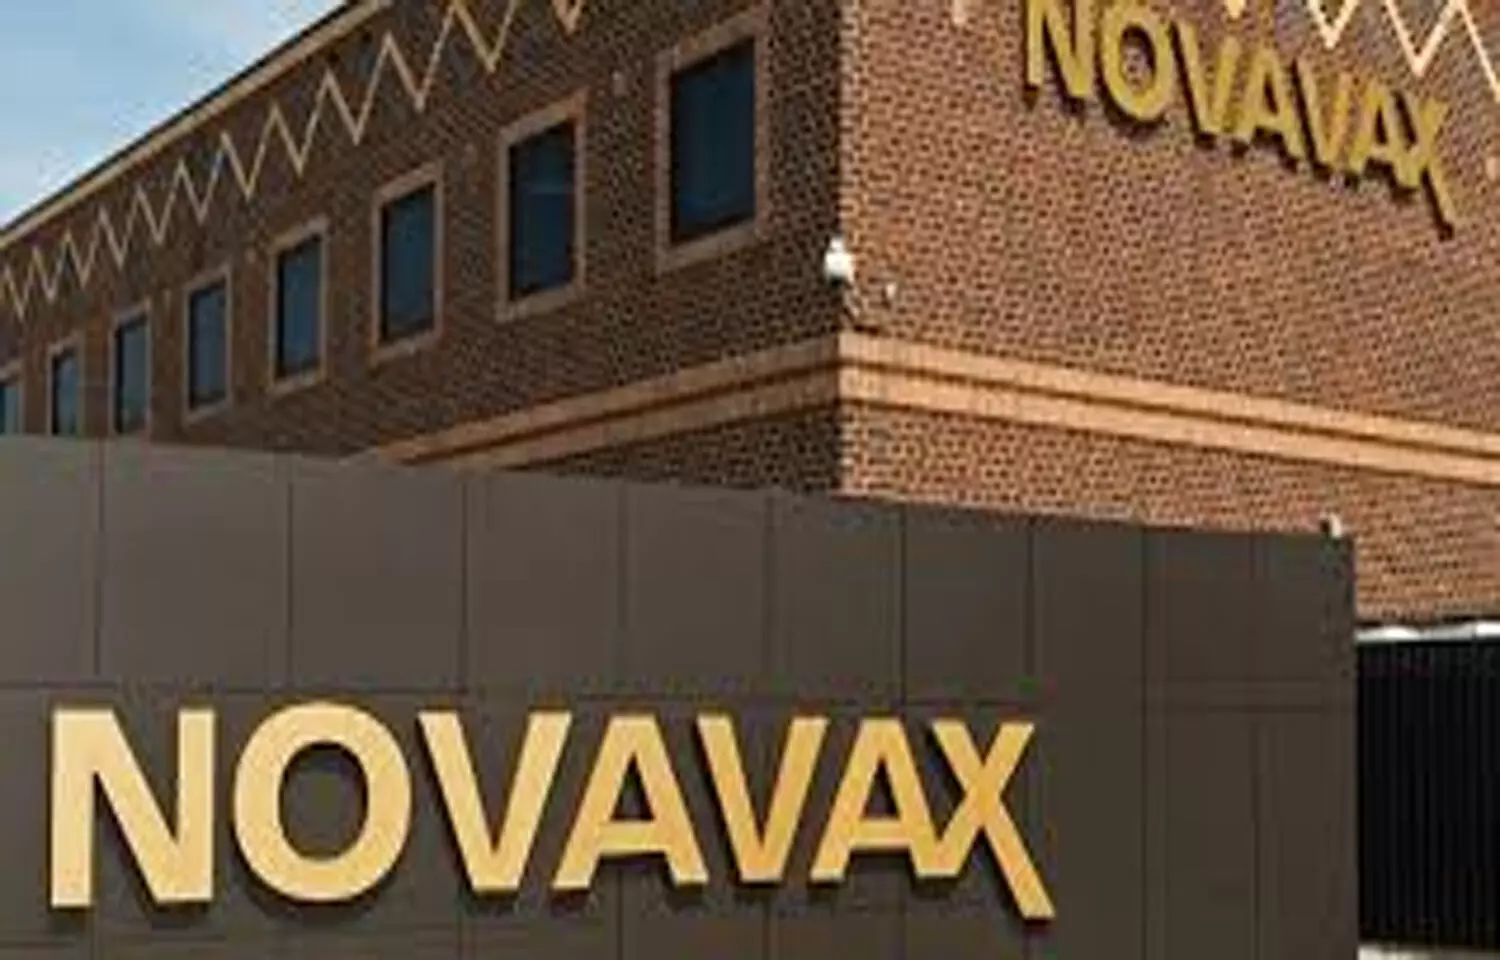 EU identifies severe allergic reactions as side effects of Novavax COVID vaccine